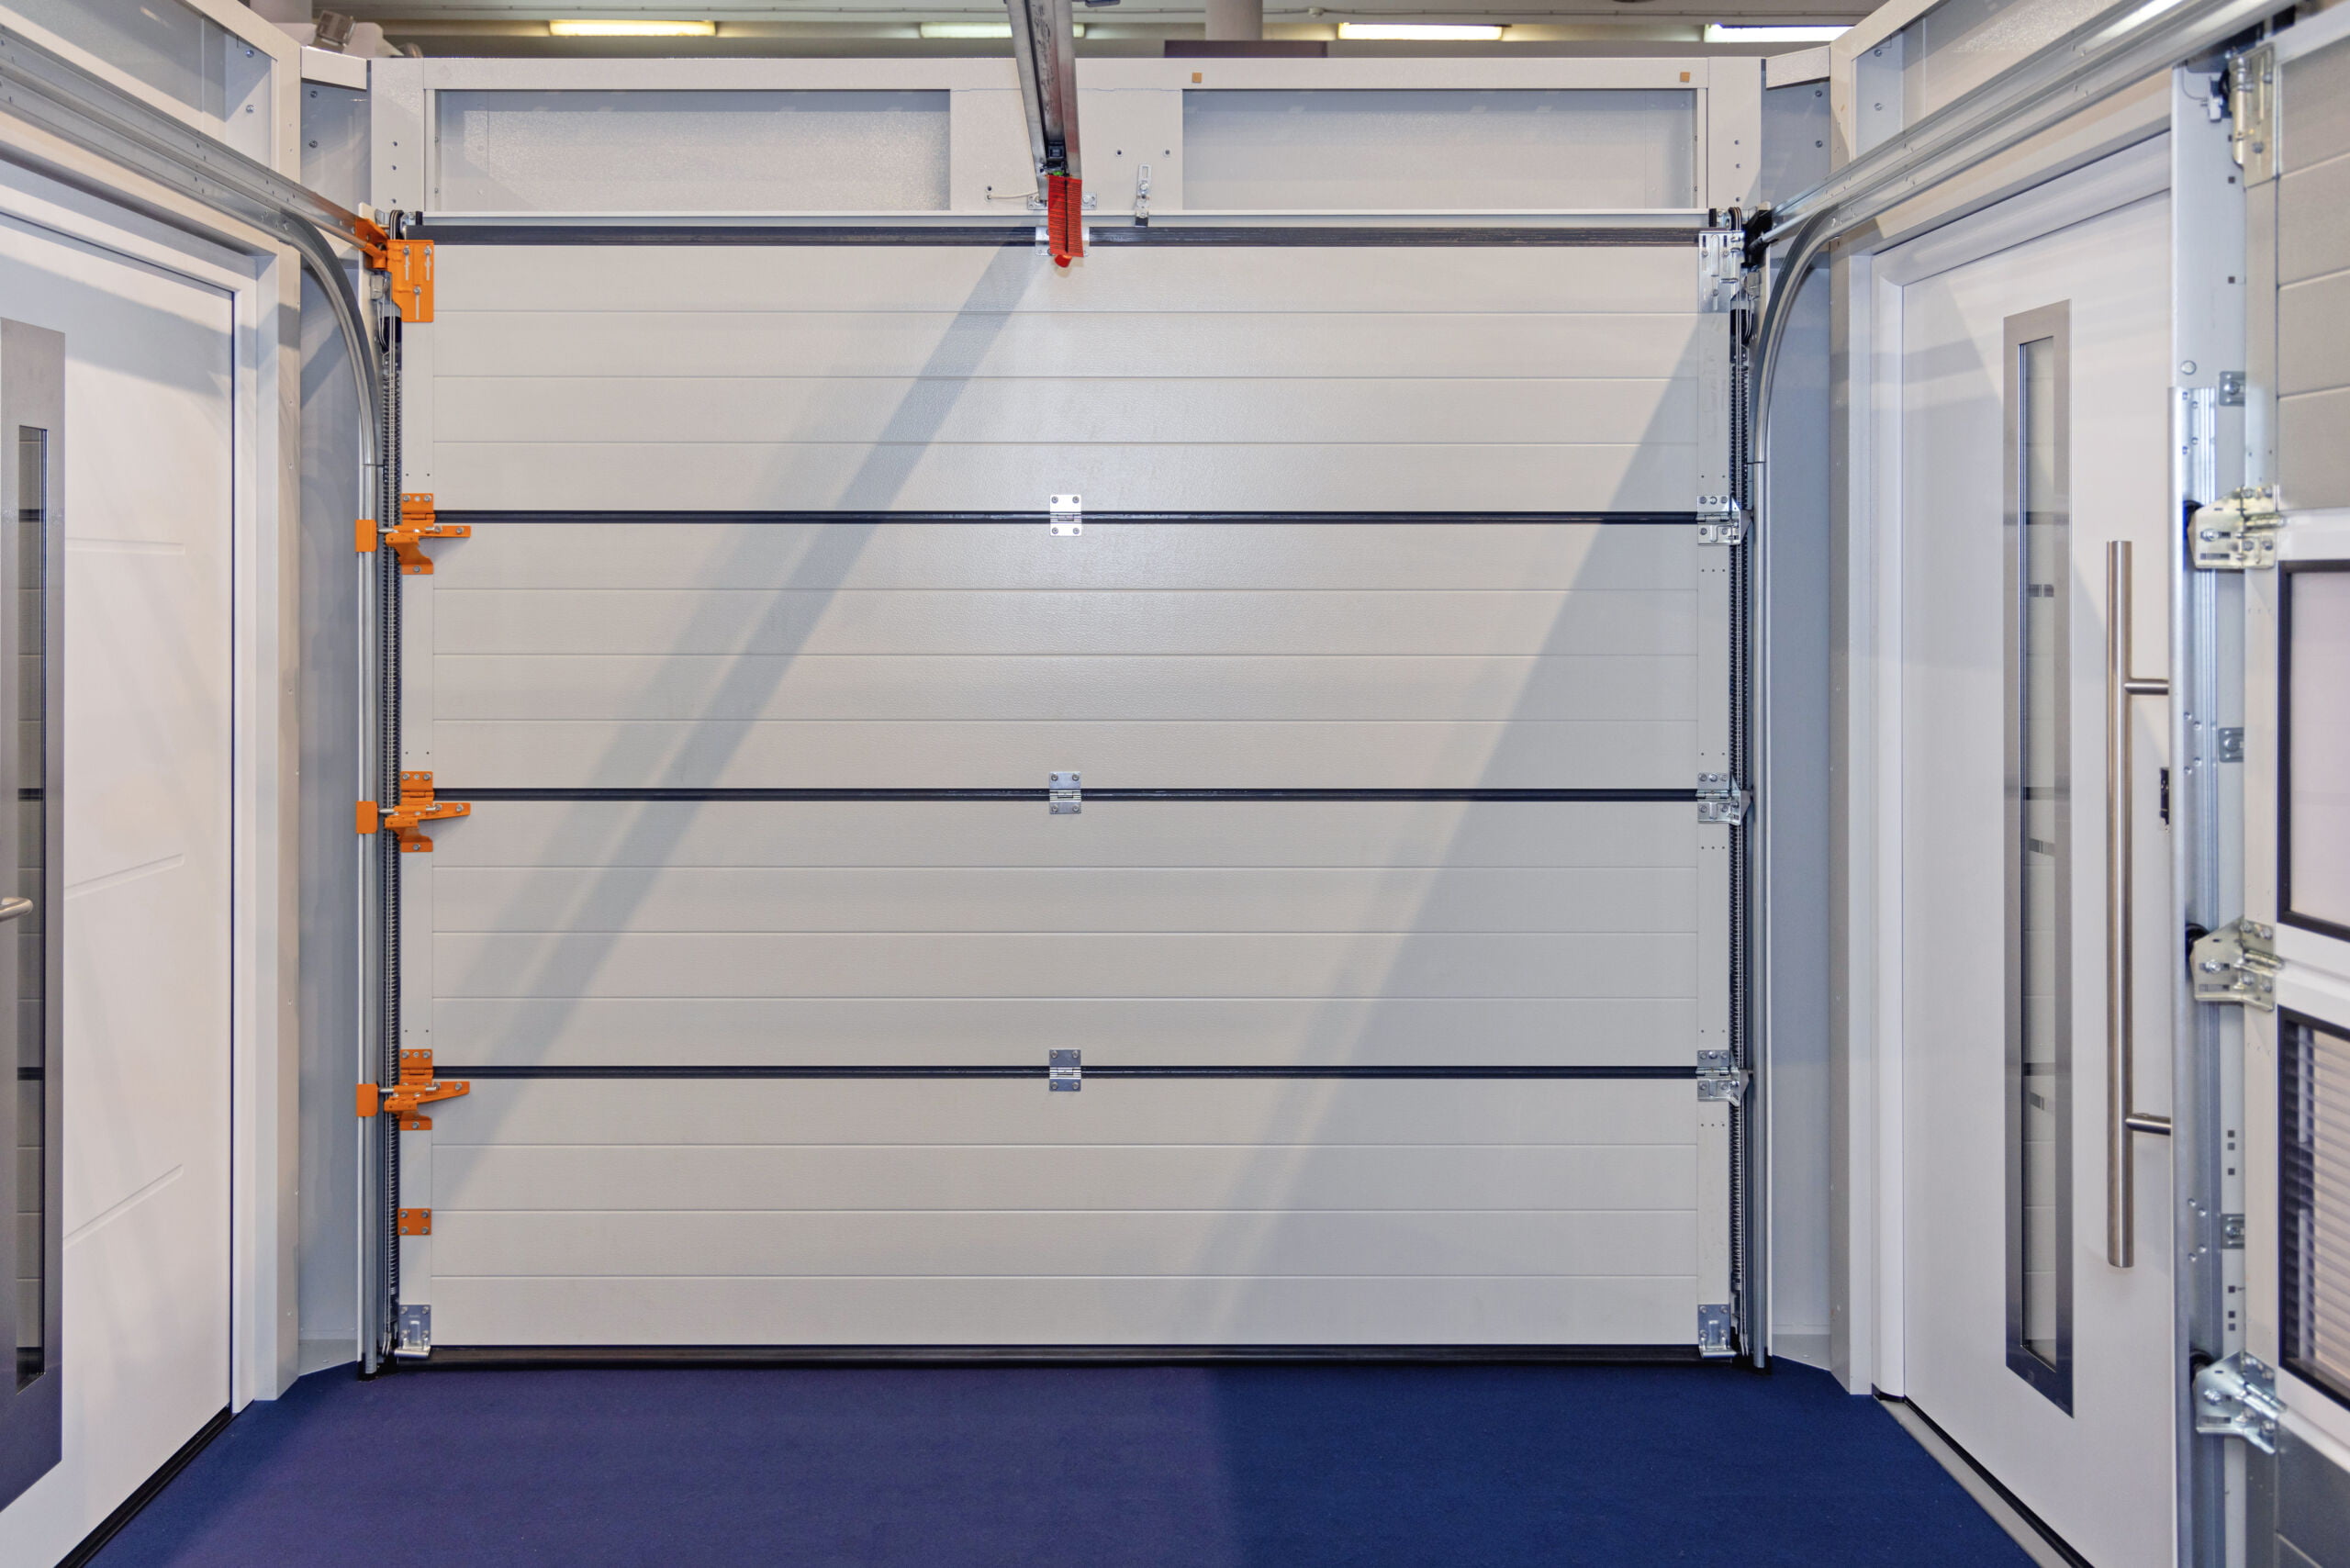 image of closed garage doors white in colour Interior View